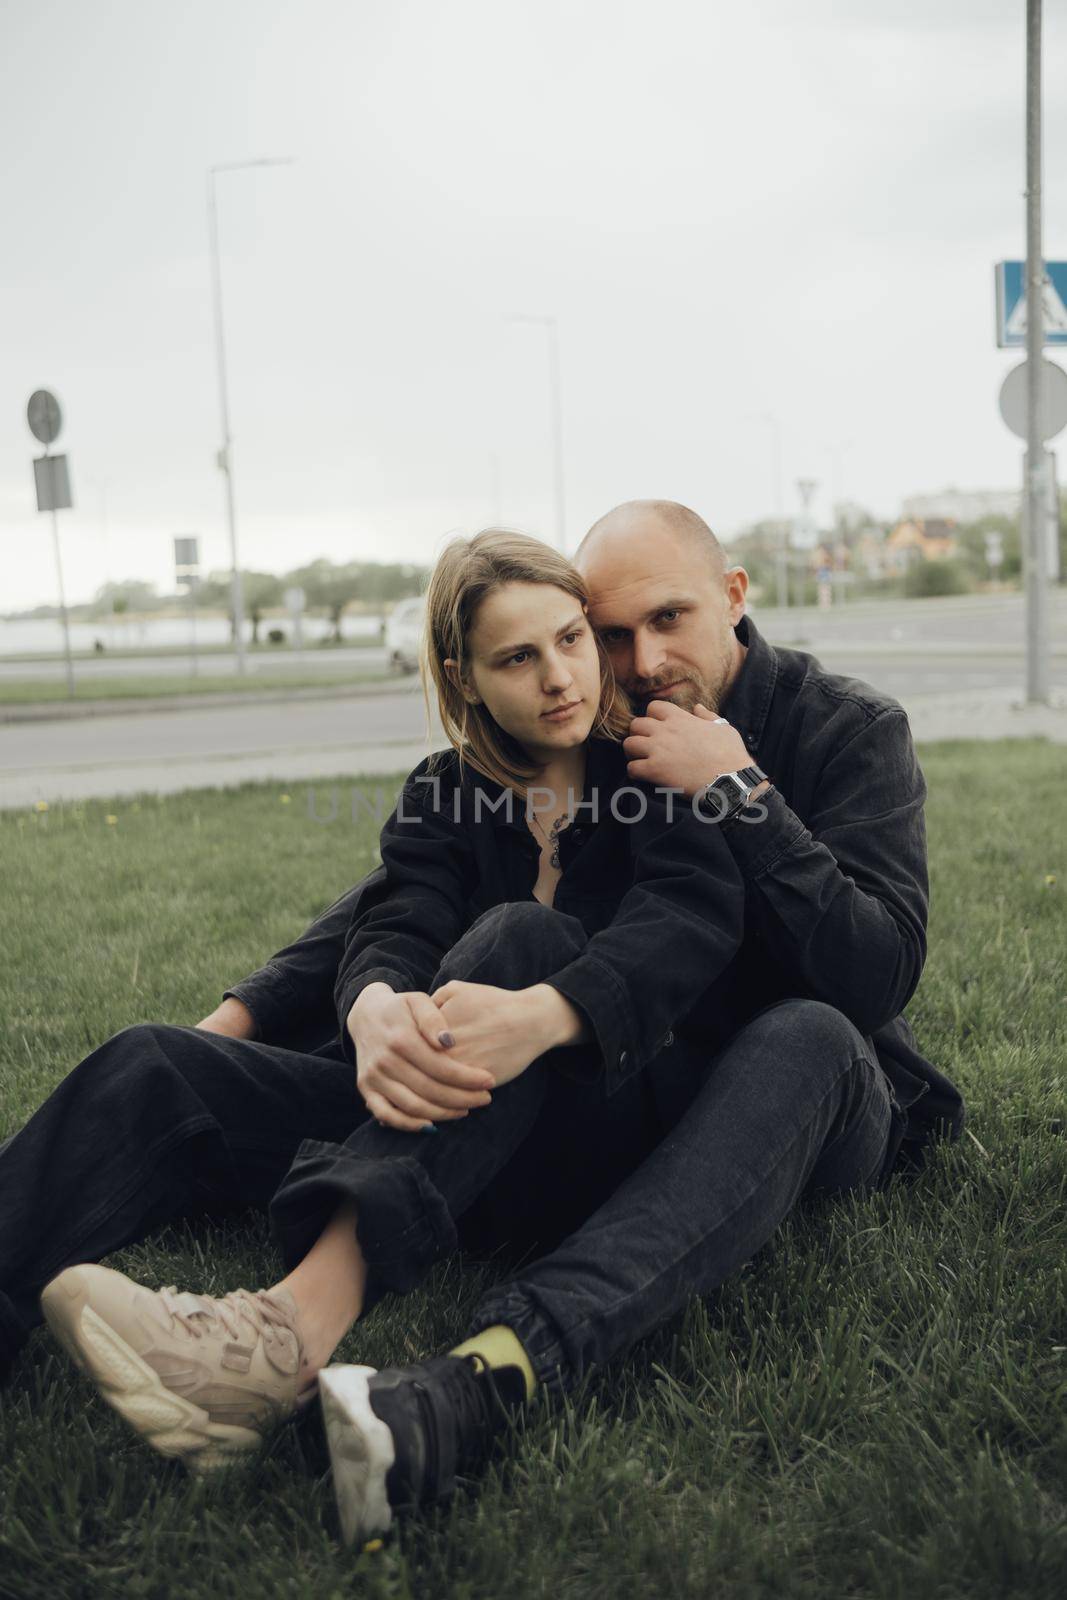 lovers hug sitting on the grass and look into the camera